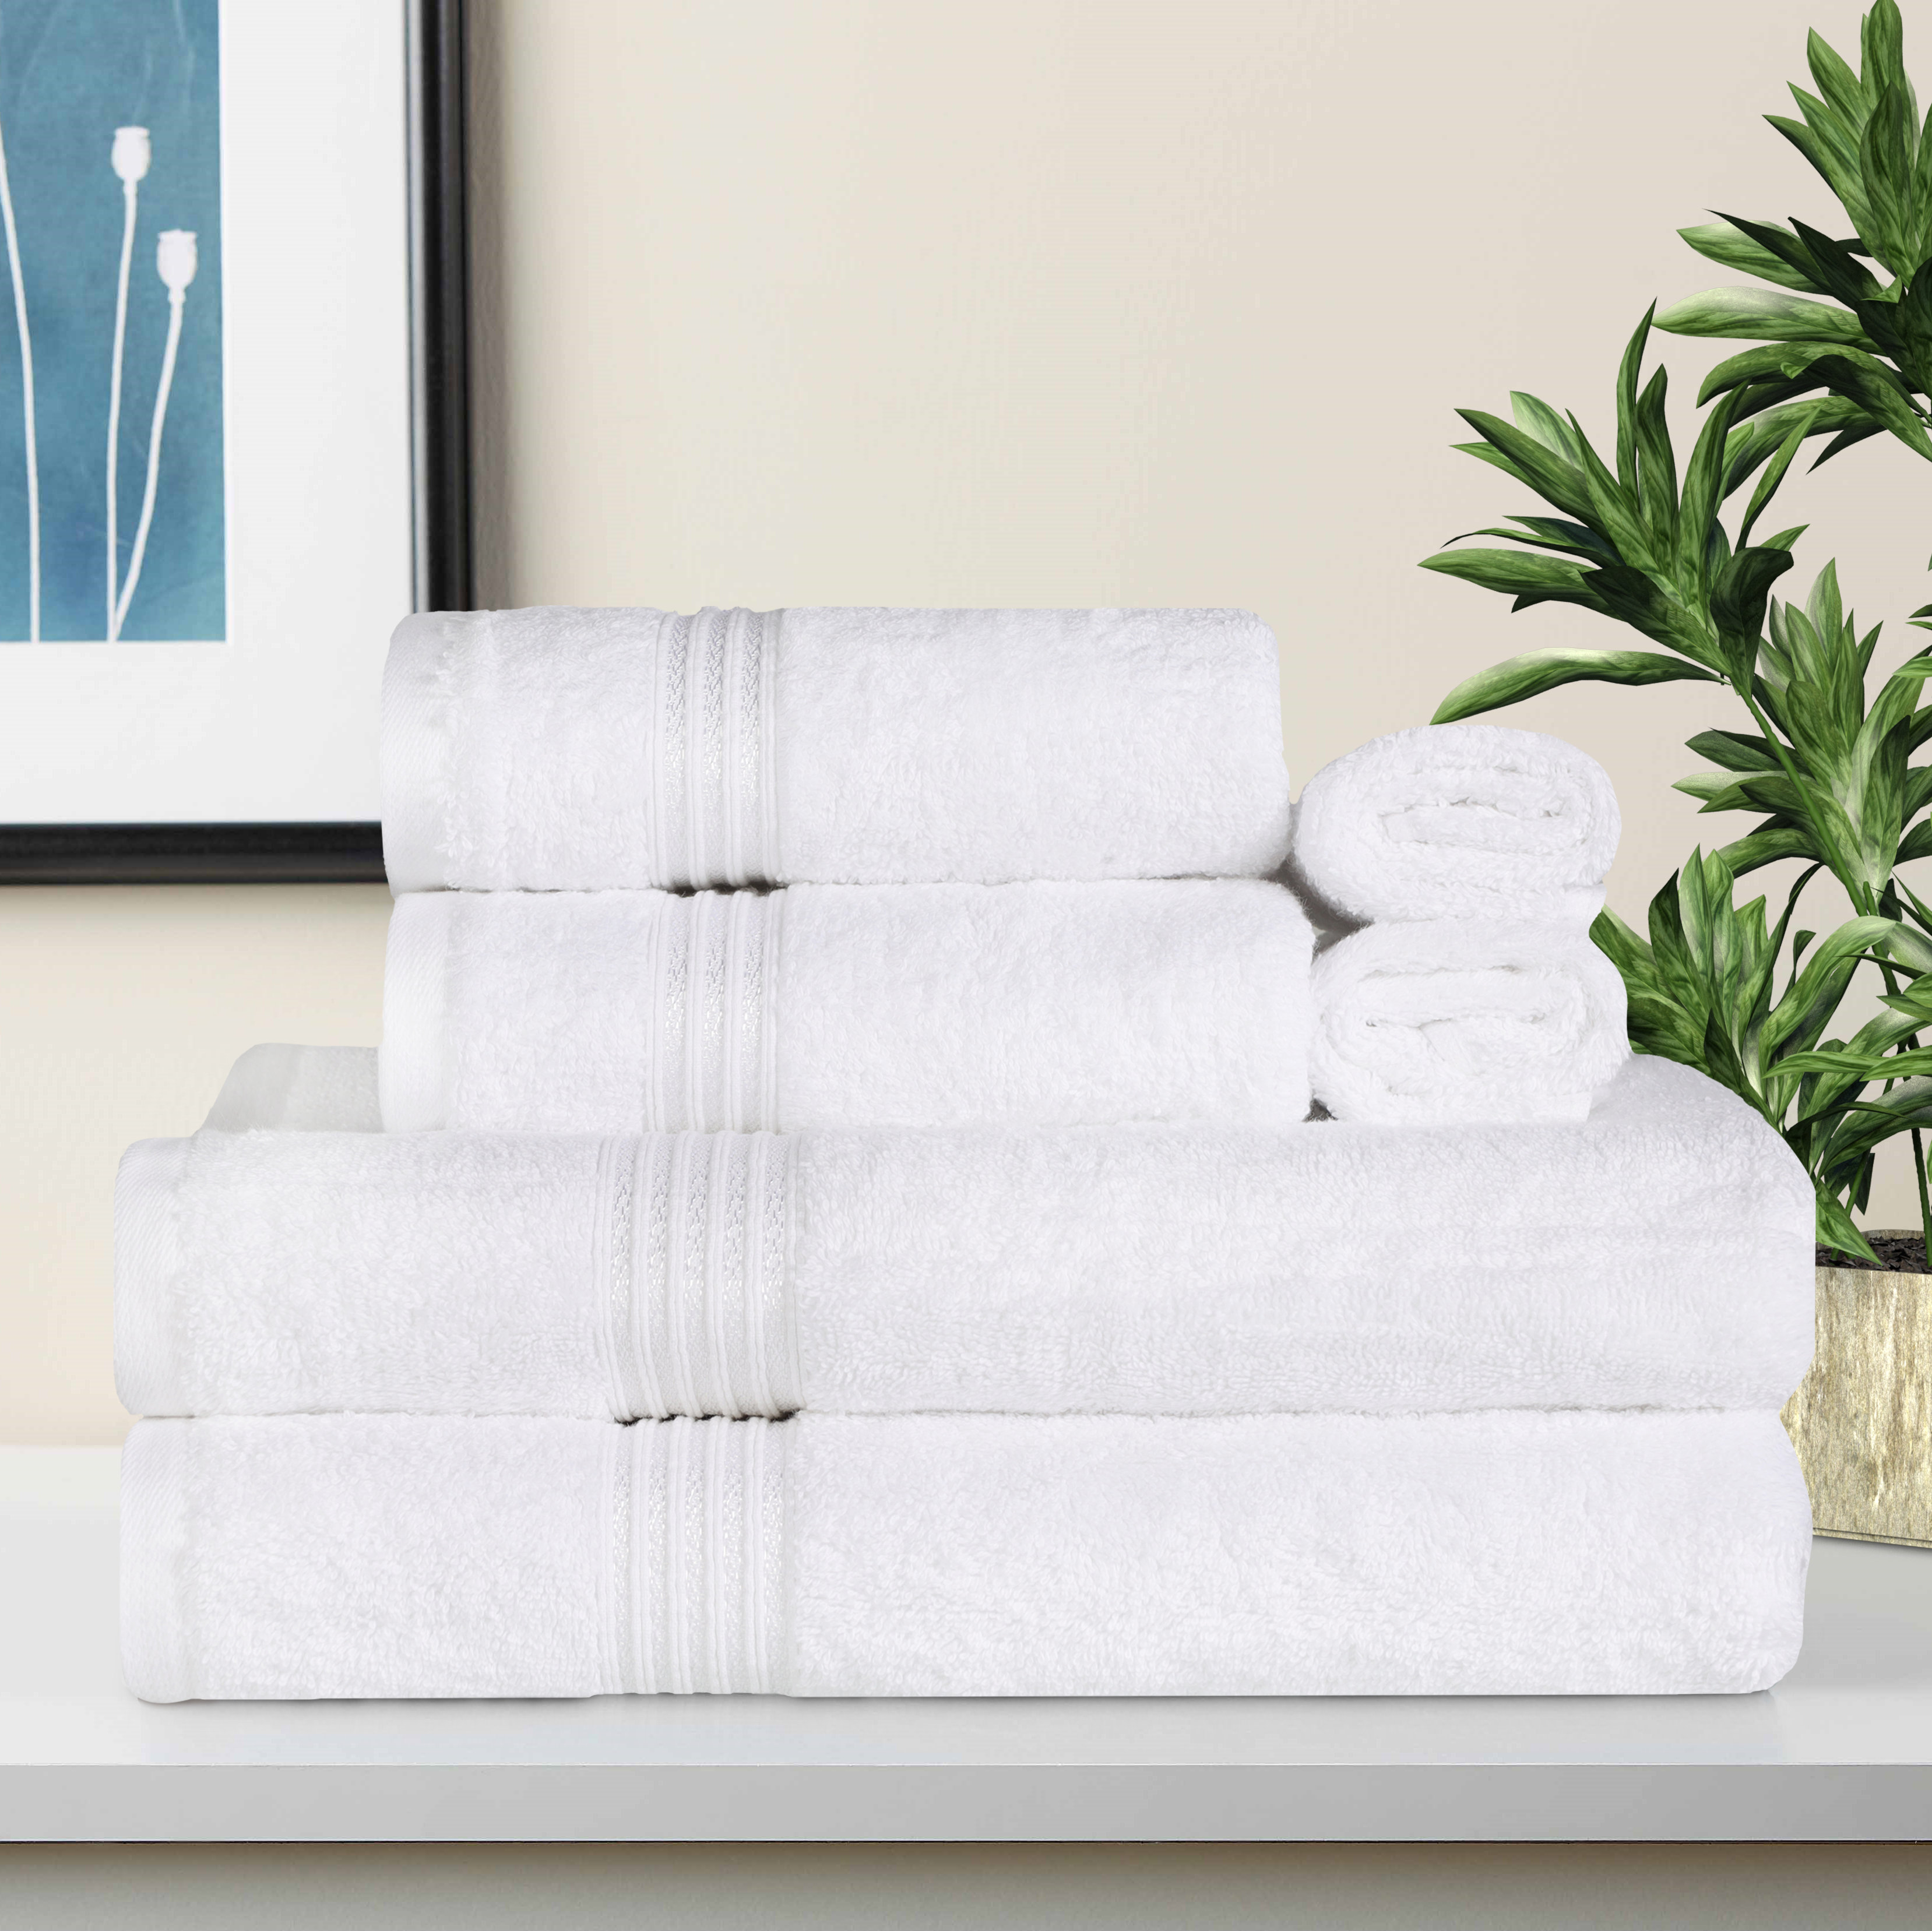 Red 48 x 32 cm Egyptian cotton Guest Towel 